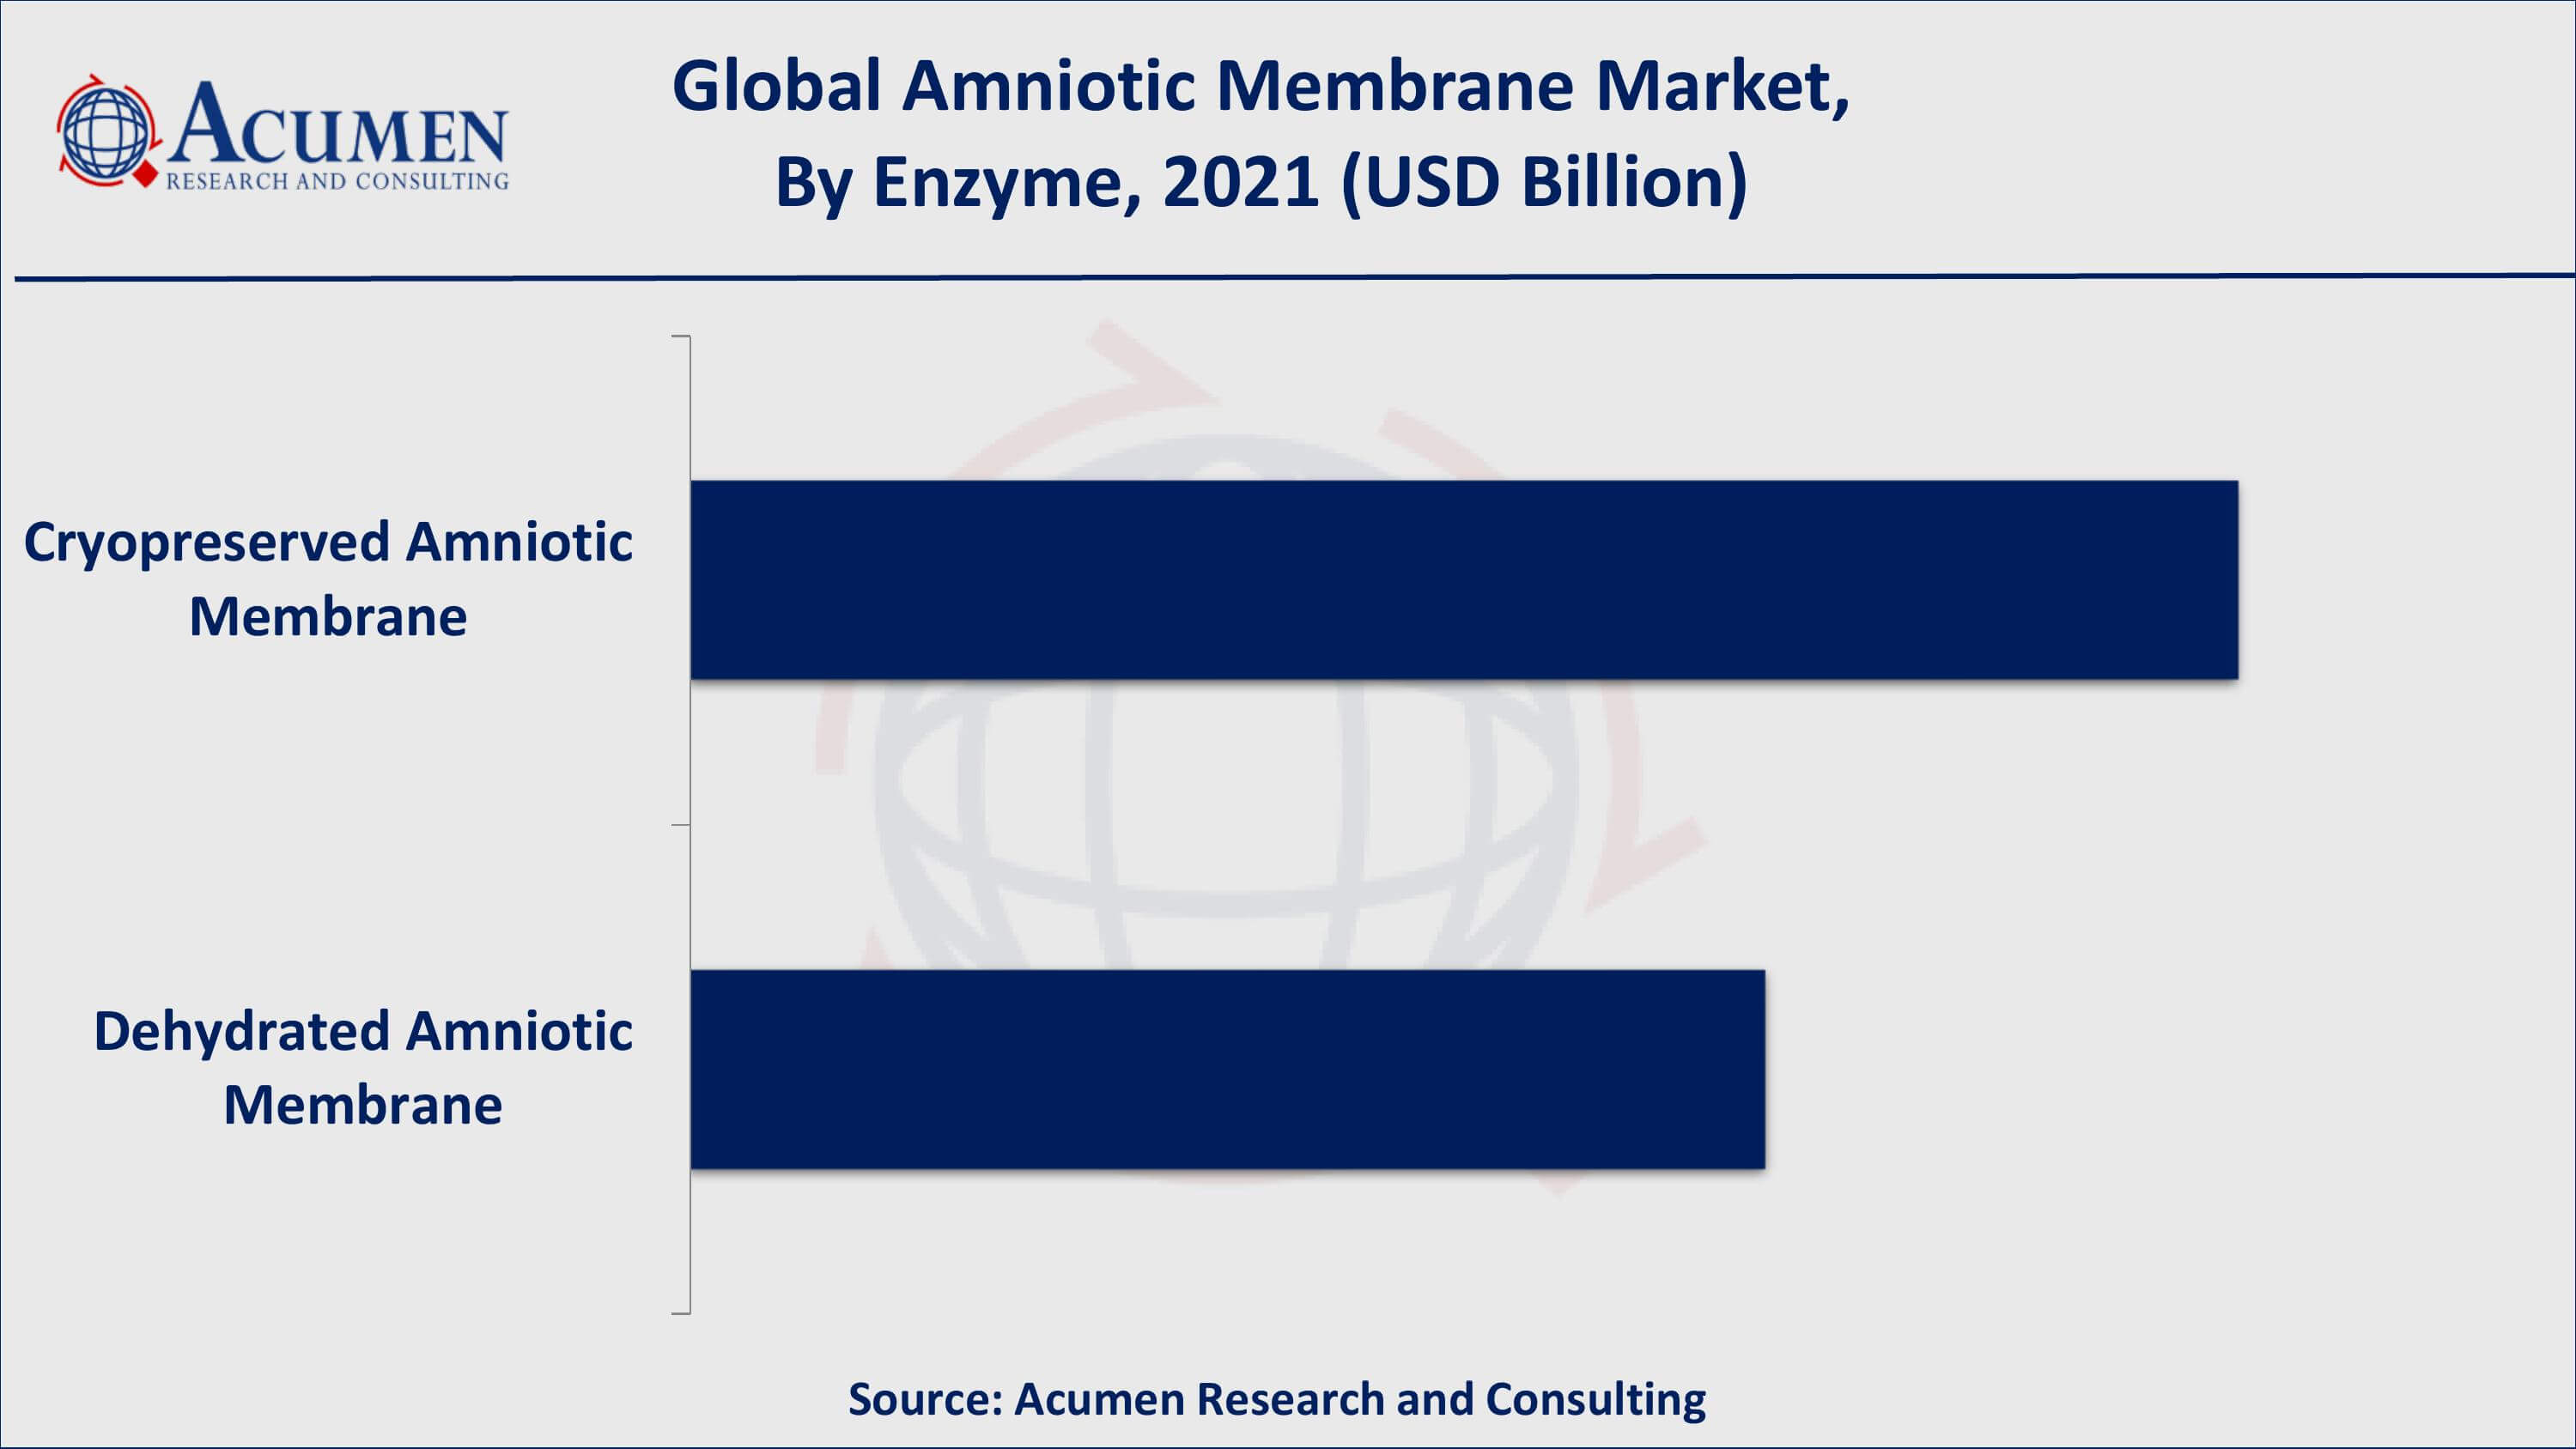 Based on enzyme, cryopreserved amniotic membrane acquired over 59% of the overall market share in 2021